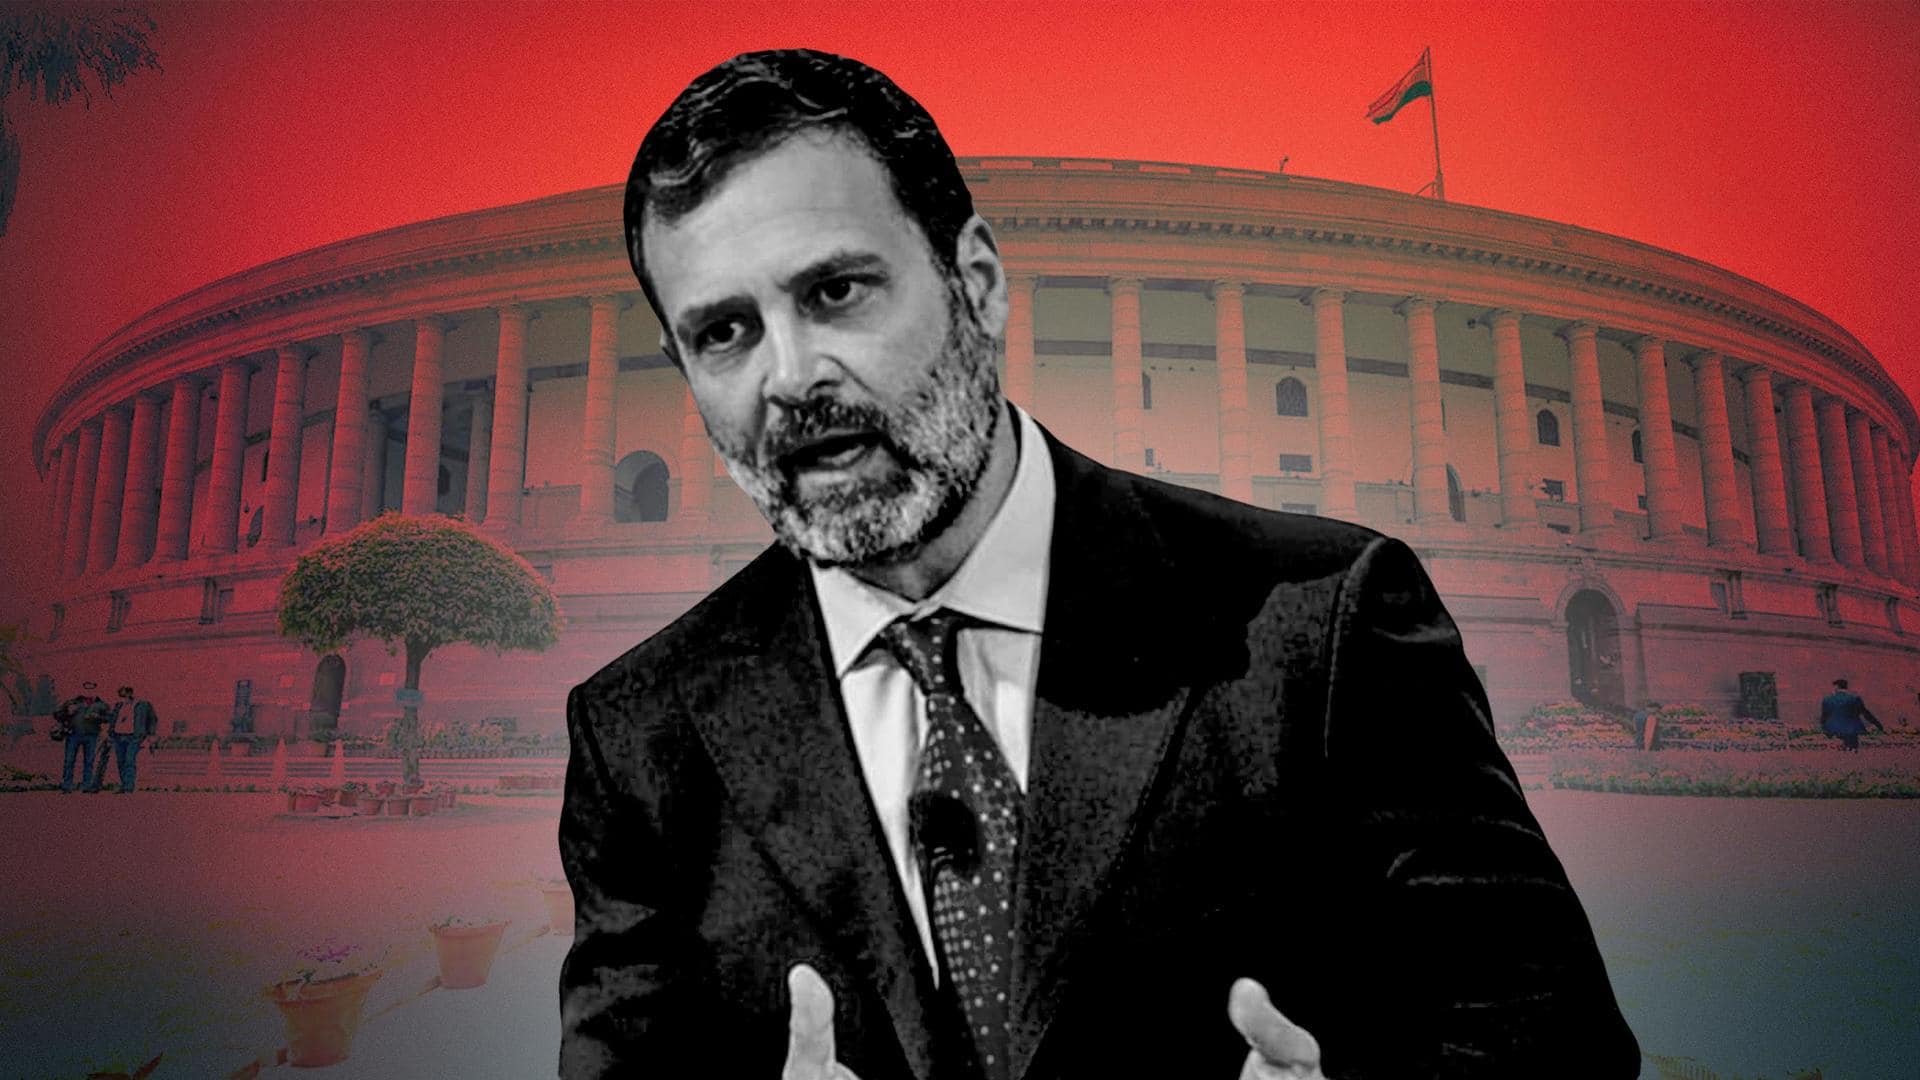 BJP slams Rahul Gandhi for allegedly seeking 'foreign interference'